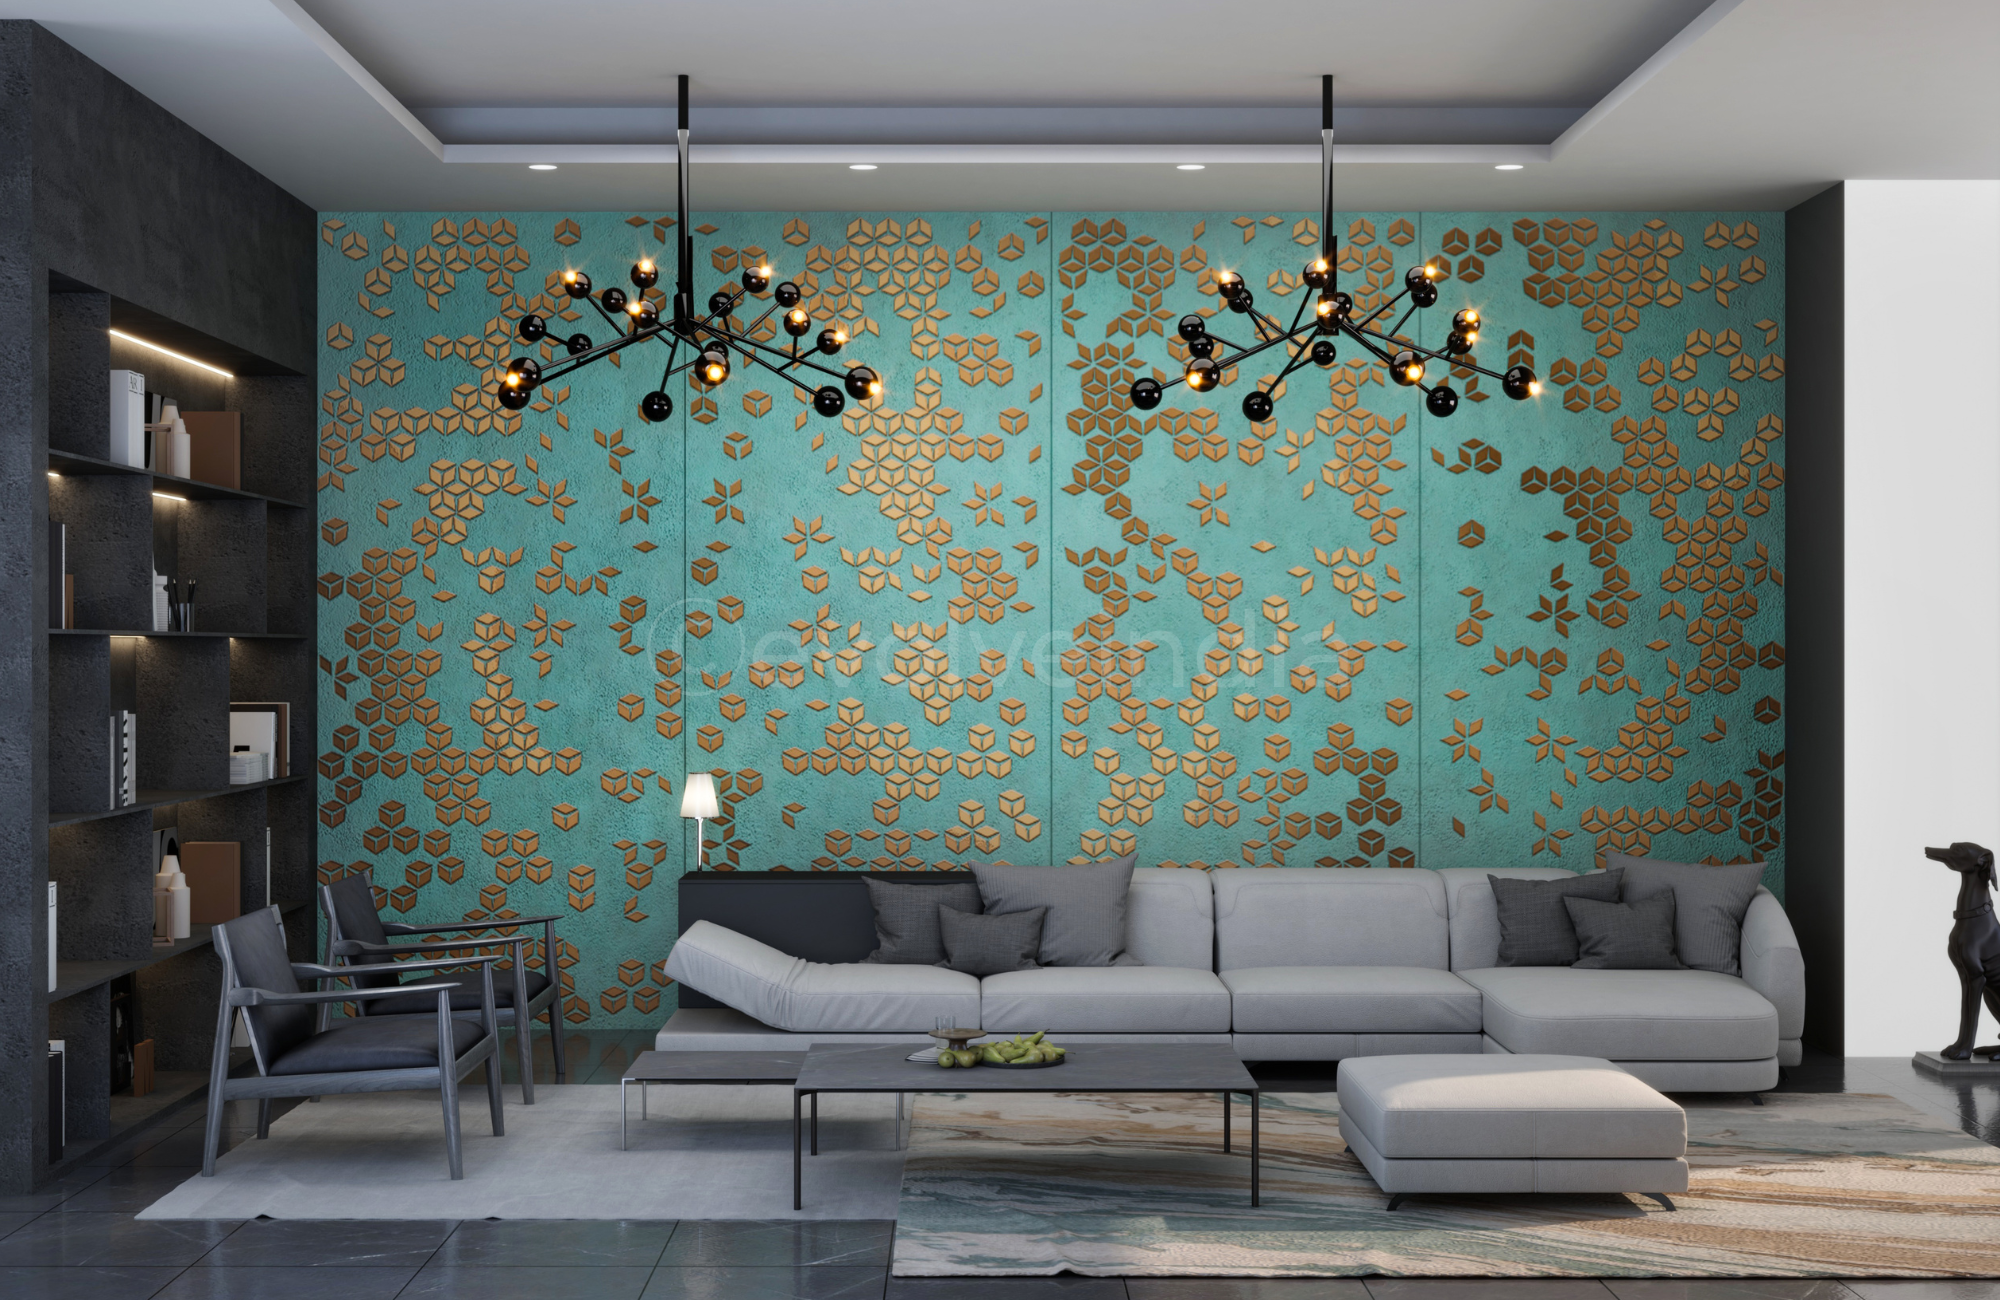 Aquilone-Copper-Patina-Accent-Wall-For-A